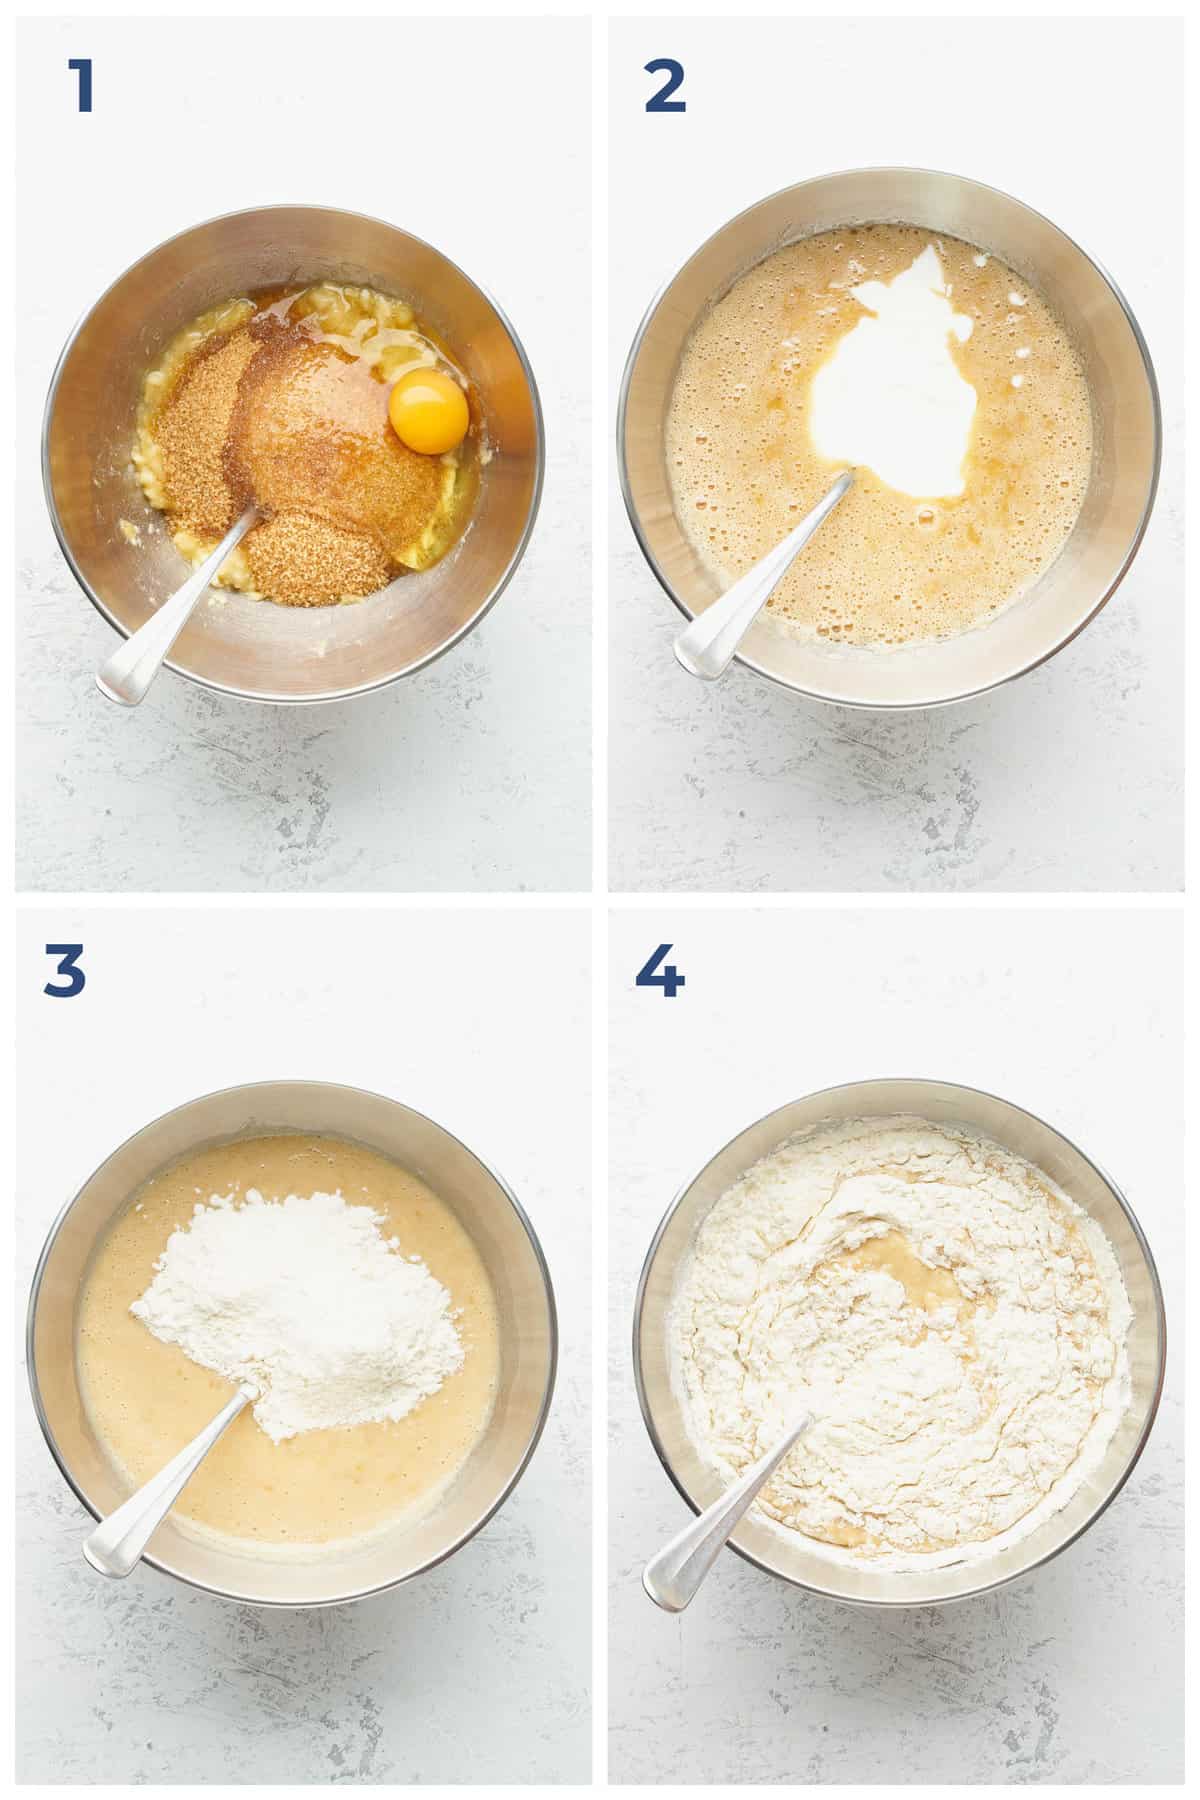 Step by step photo directions showing how to make the batter for homemade banana bread with blueberries.